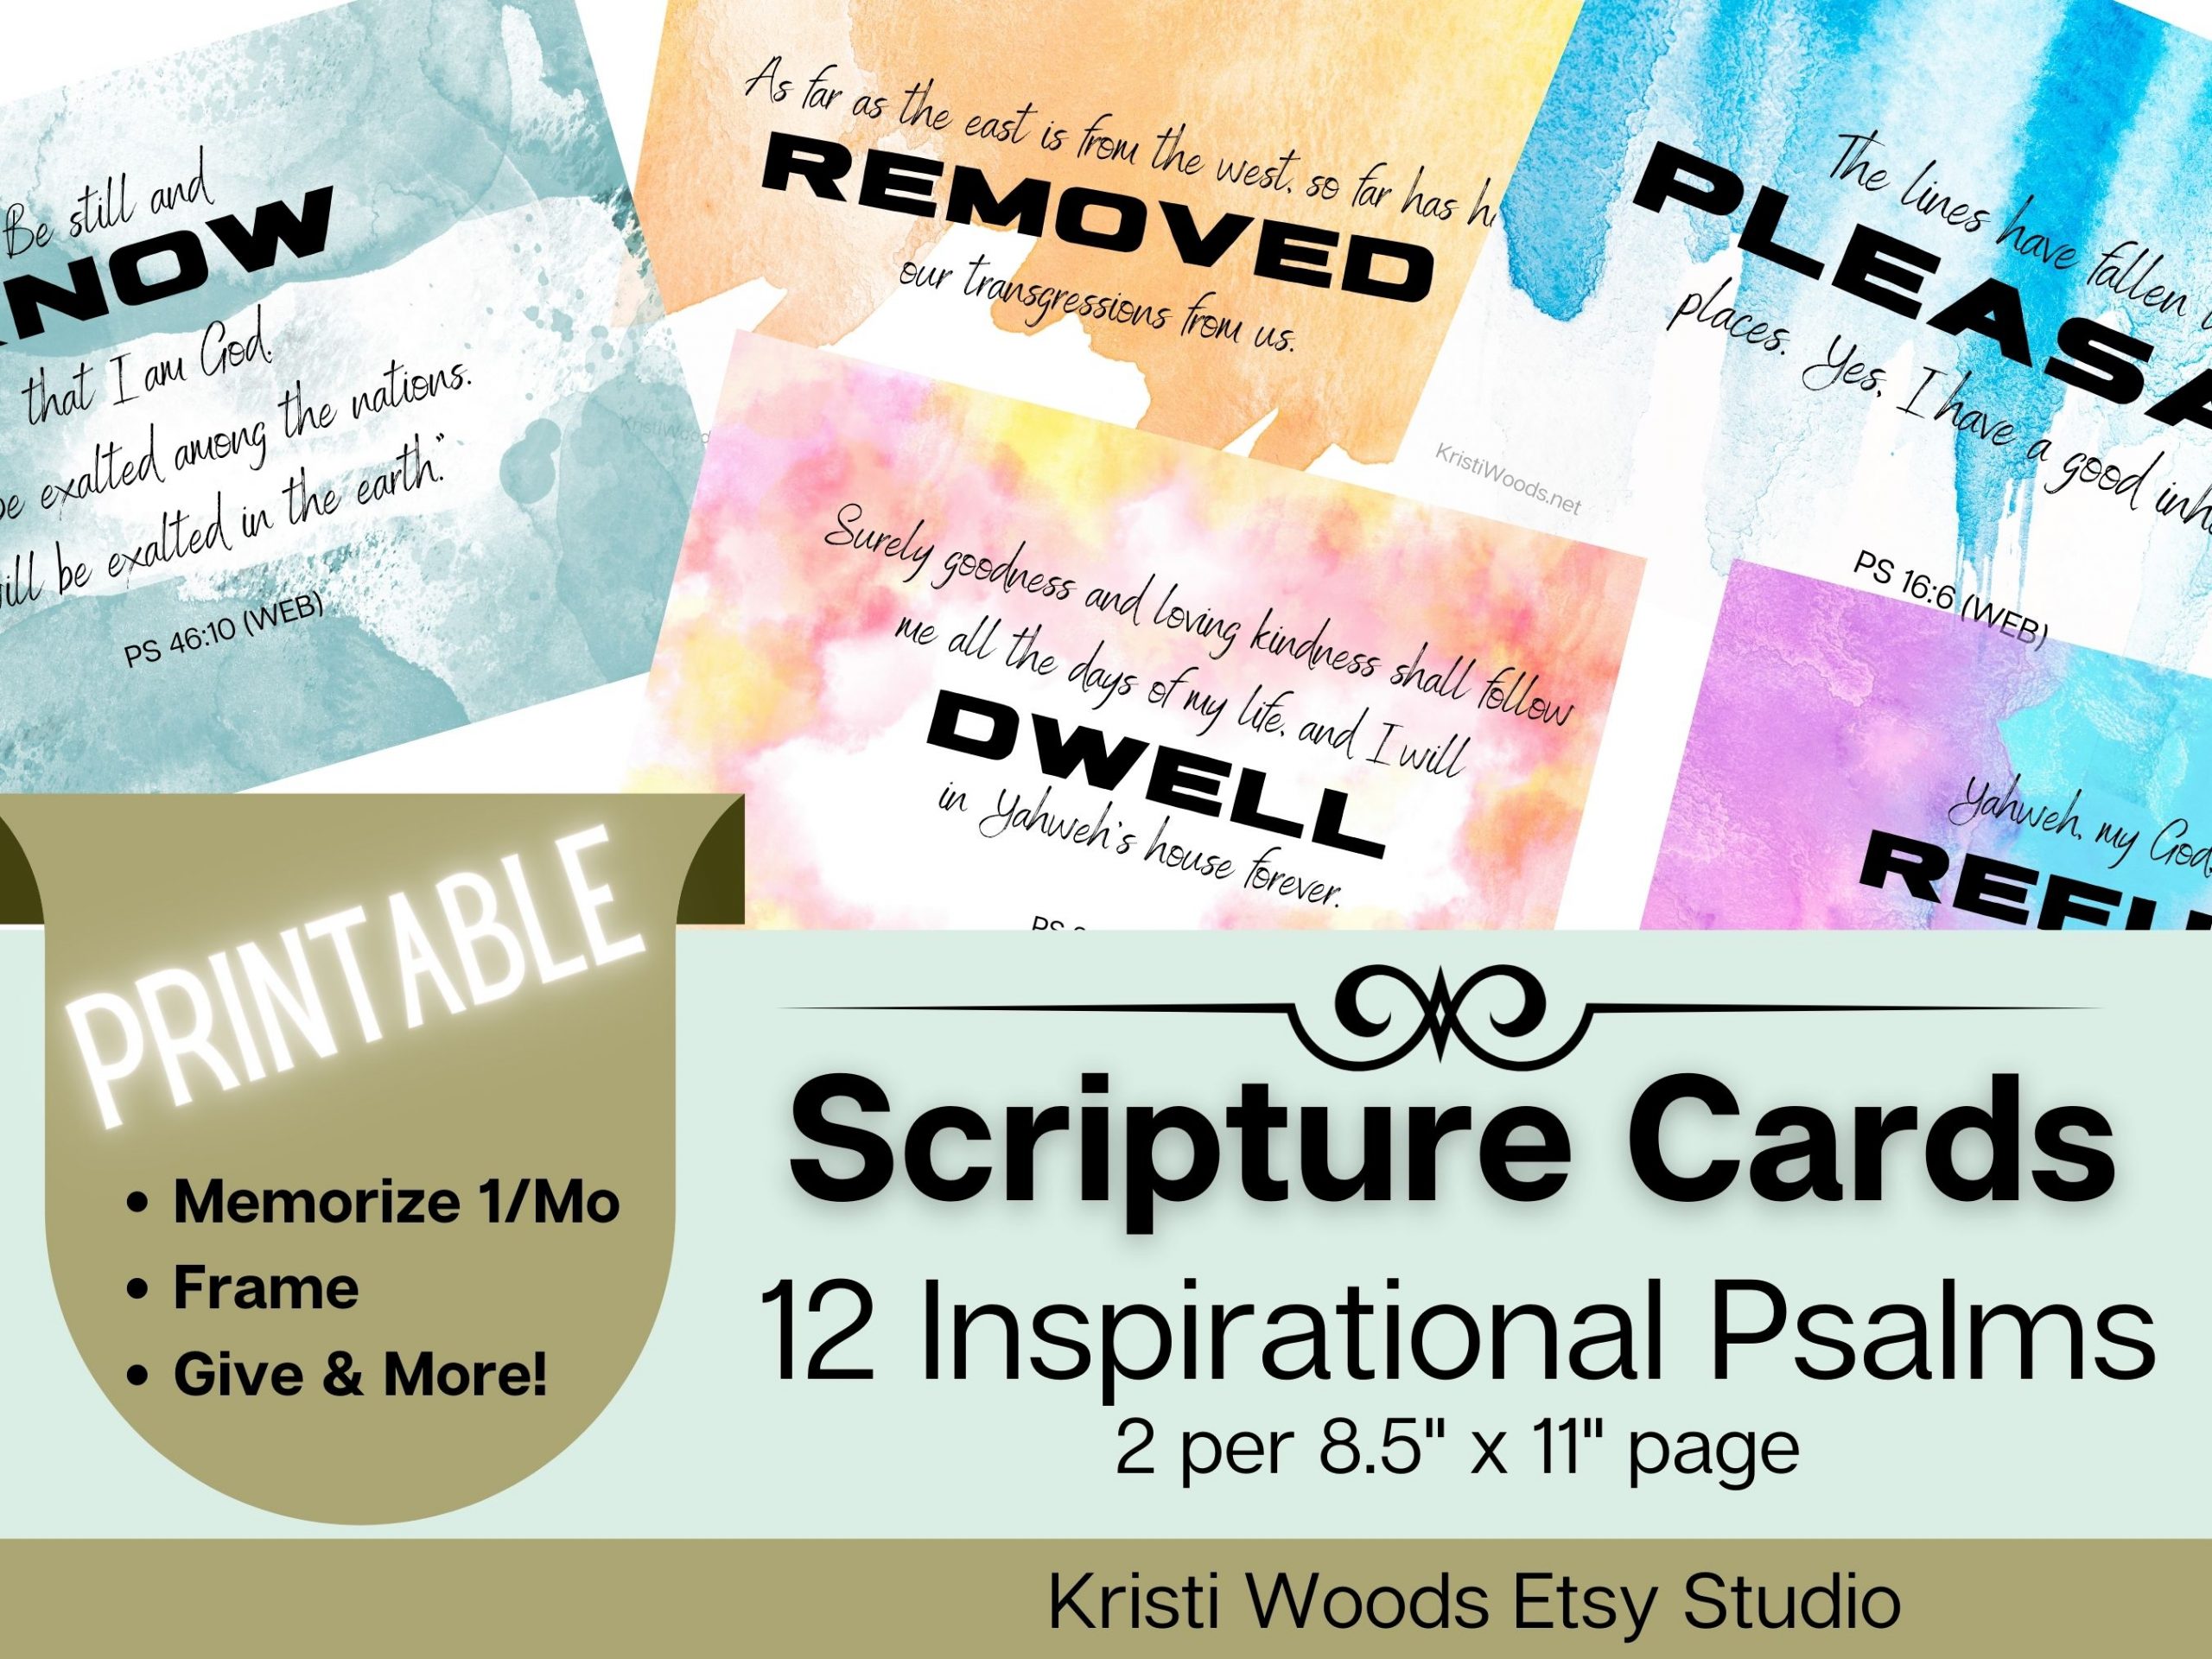 Thumbnail of 12 Scripture Cards, verses from Psalms, printable and available in the Kristi Woods Etsy Studio